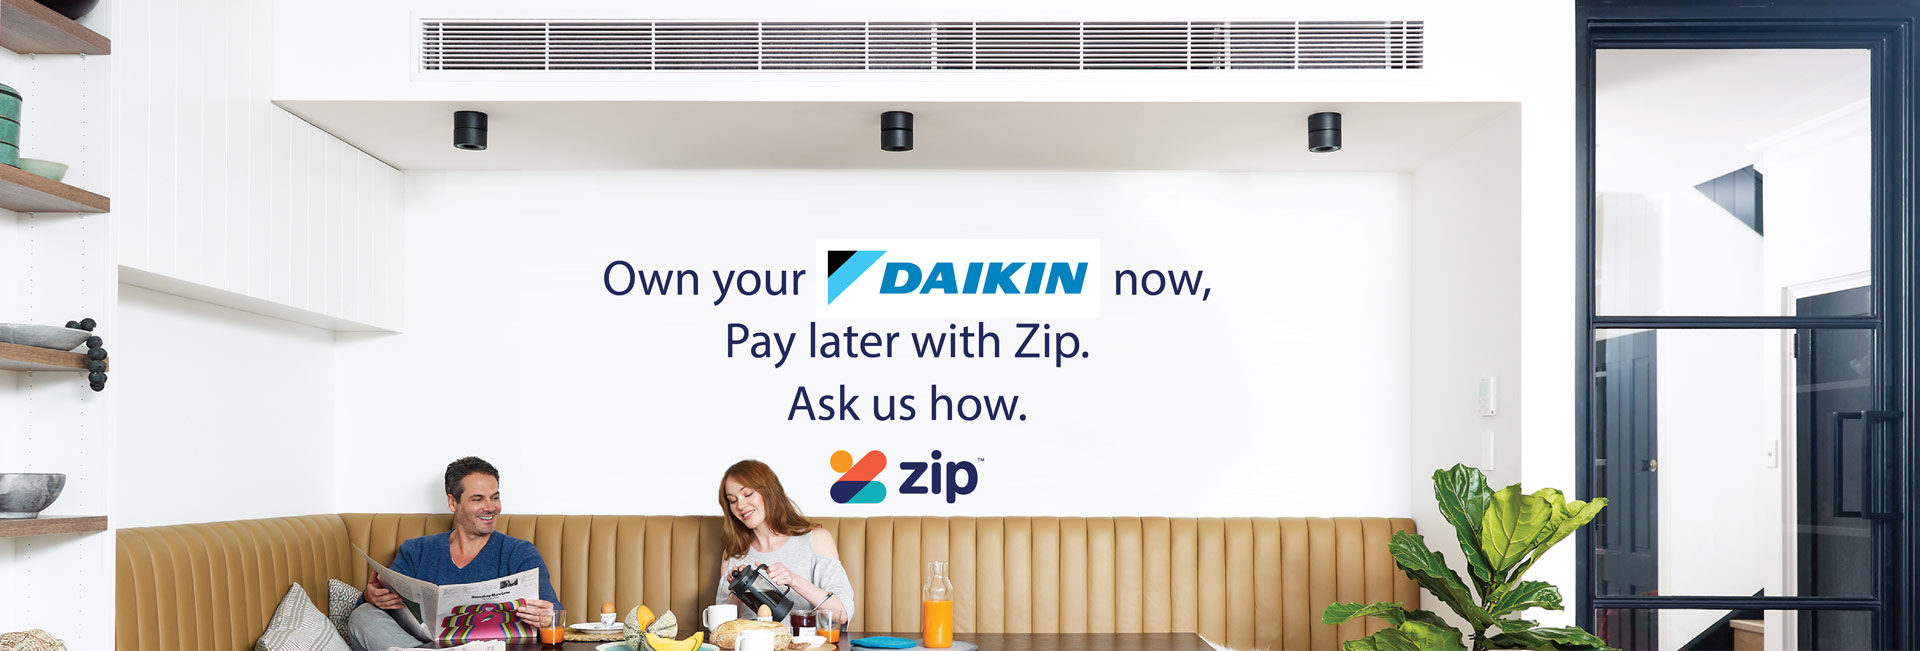 Banner saying own your daikin now, pay later with zip, ask us how